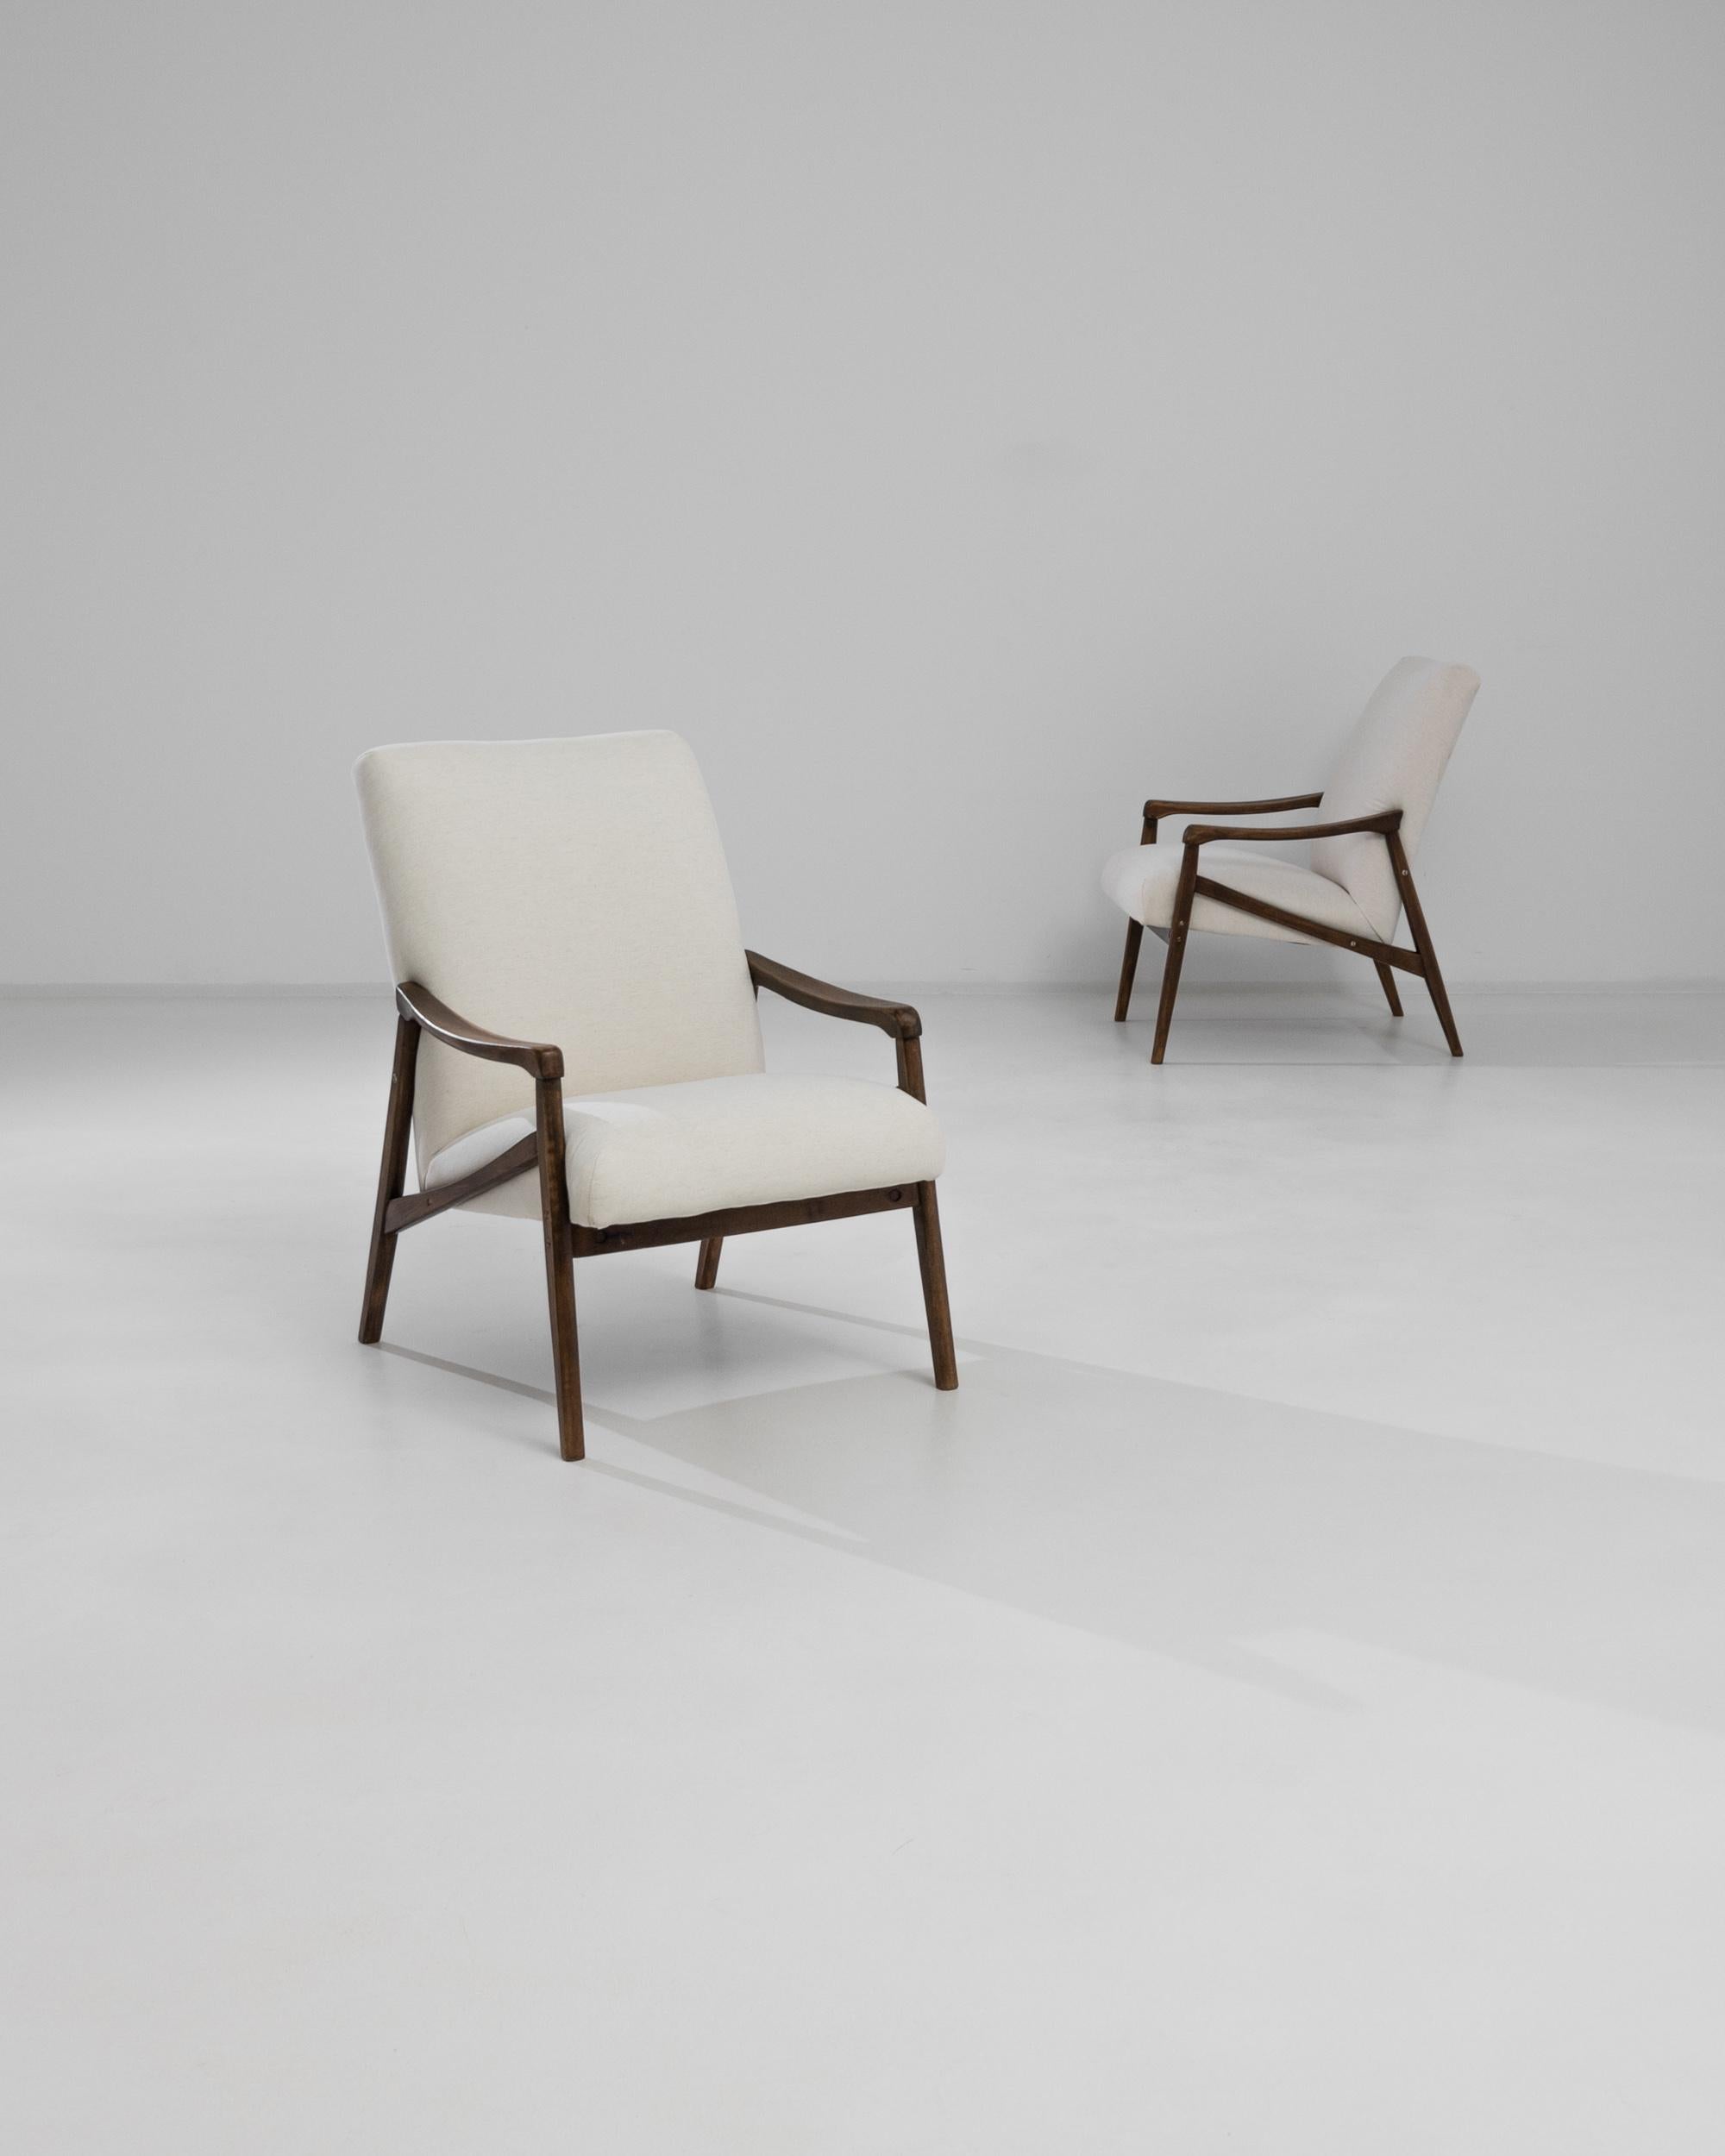 This pair of Mid-Century Modern armchairs effortlessly combine simplicity with sophistication. Made in the former Czechoslovakia in the 1960s, the design attributed to Jiri Jiroutek, the gentle curve of the bentwood armrests evoke the organic lines